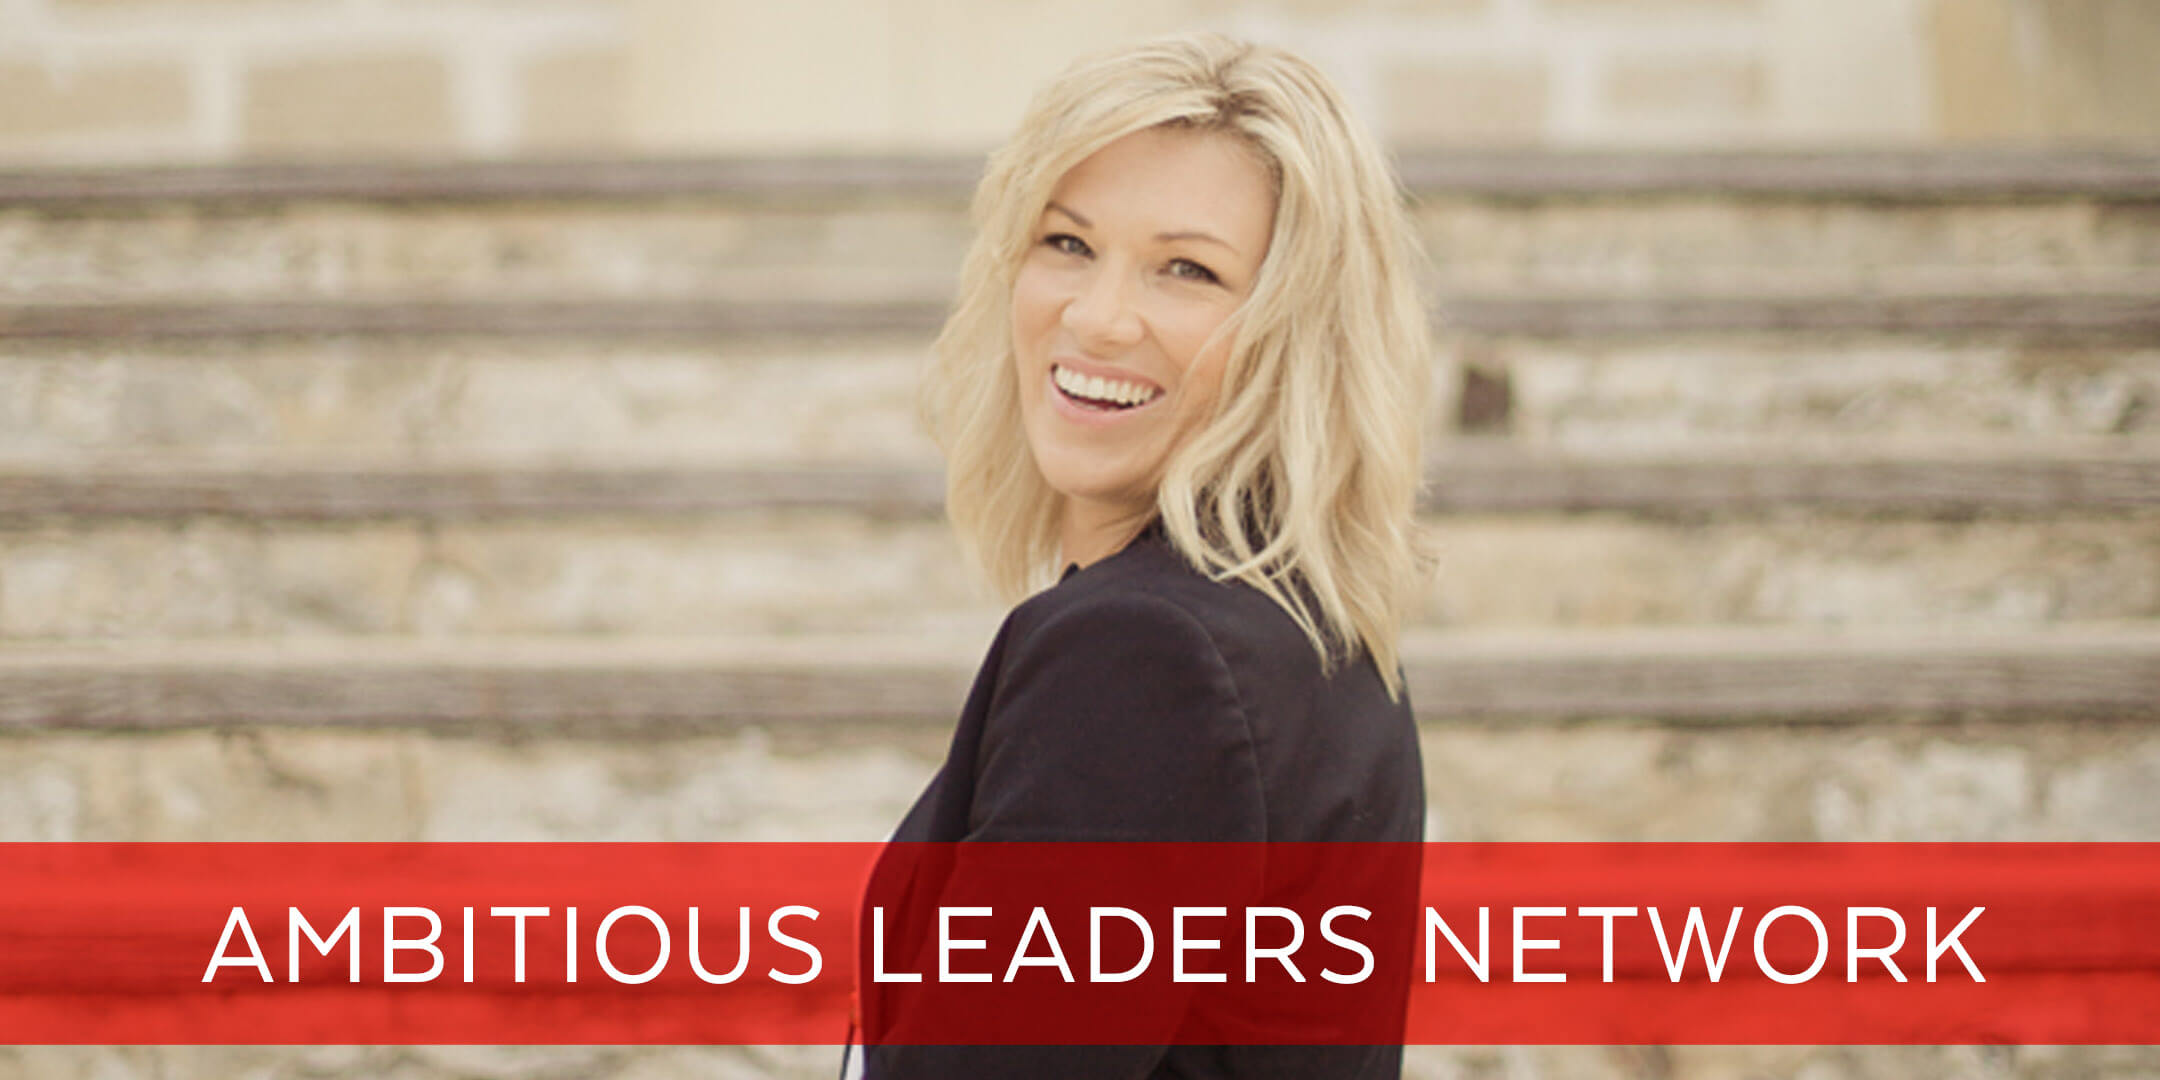 Nicky Thomas - Speaker At The Ambitious Leaders Network